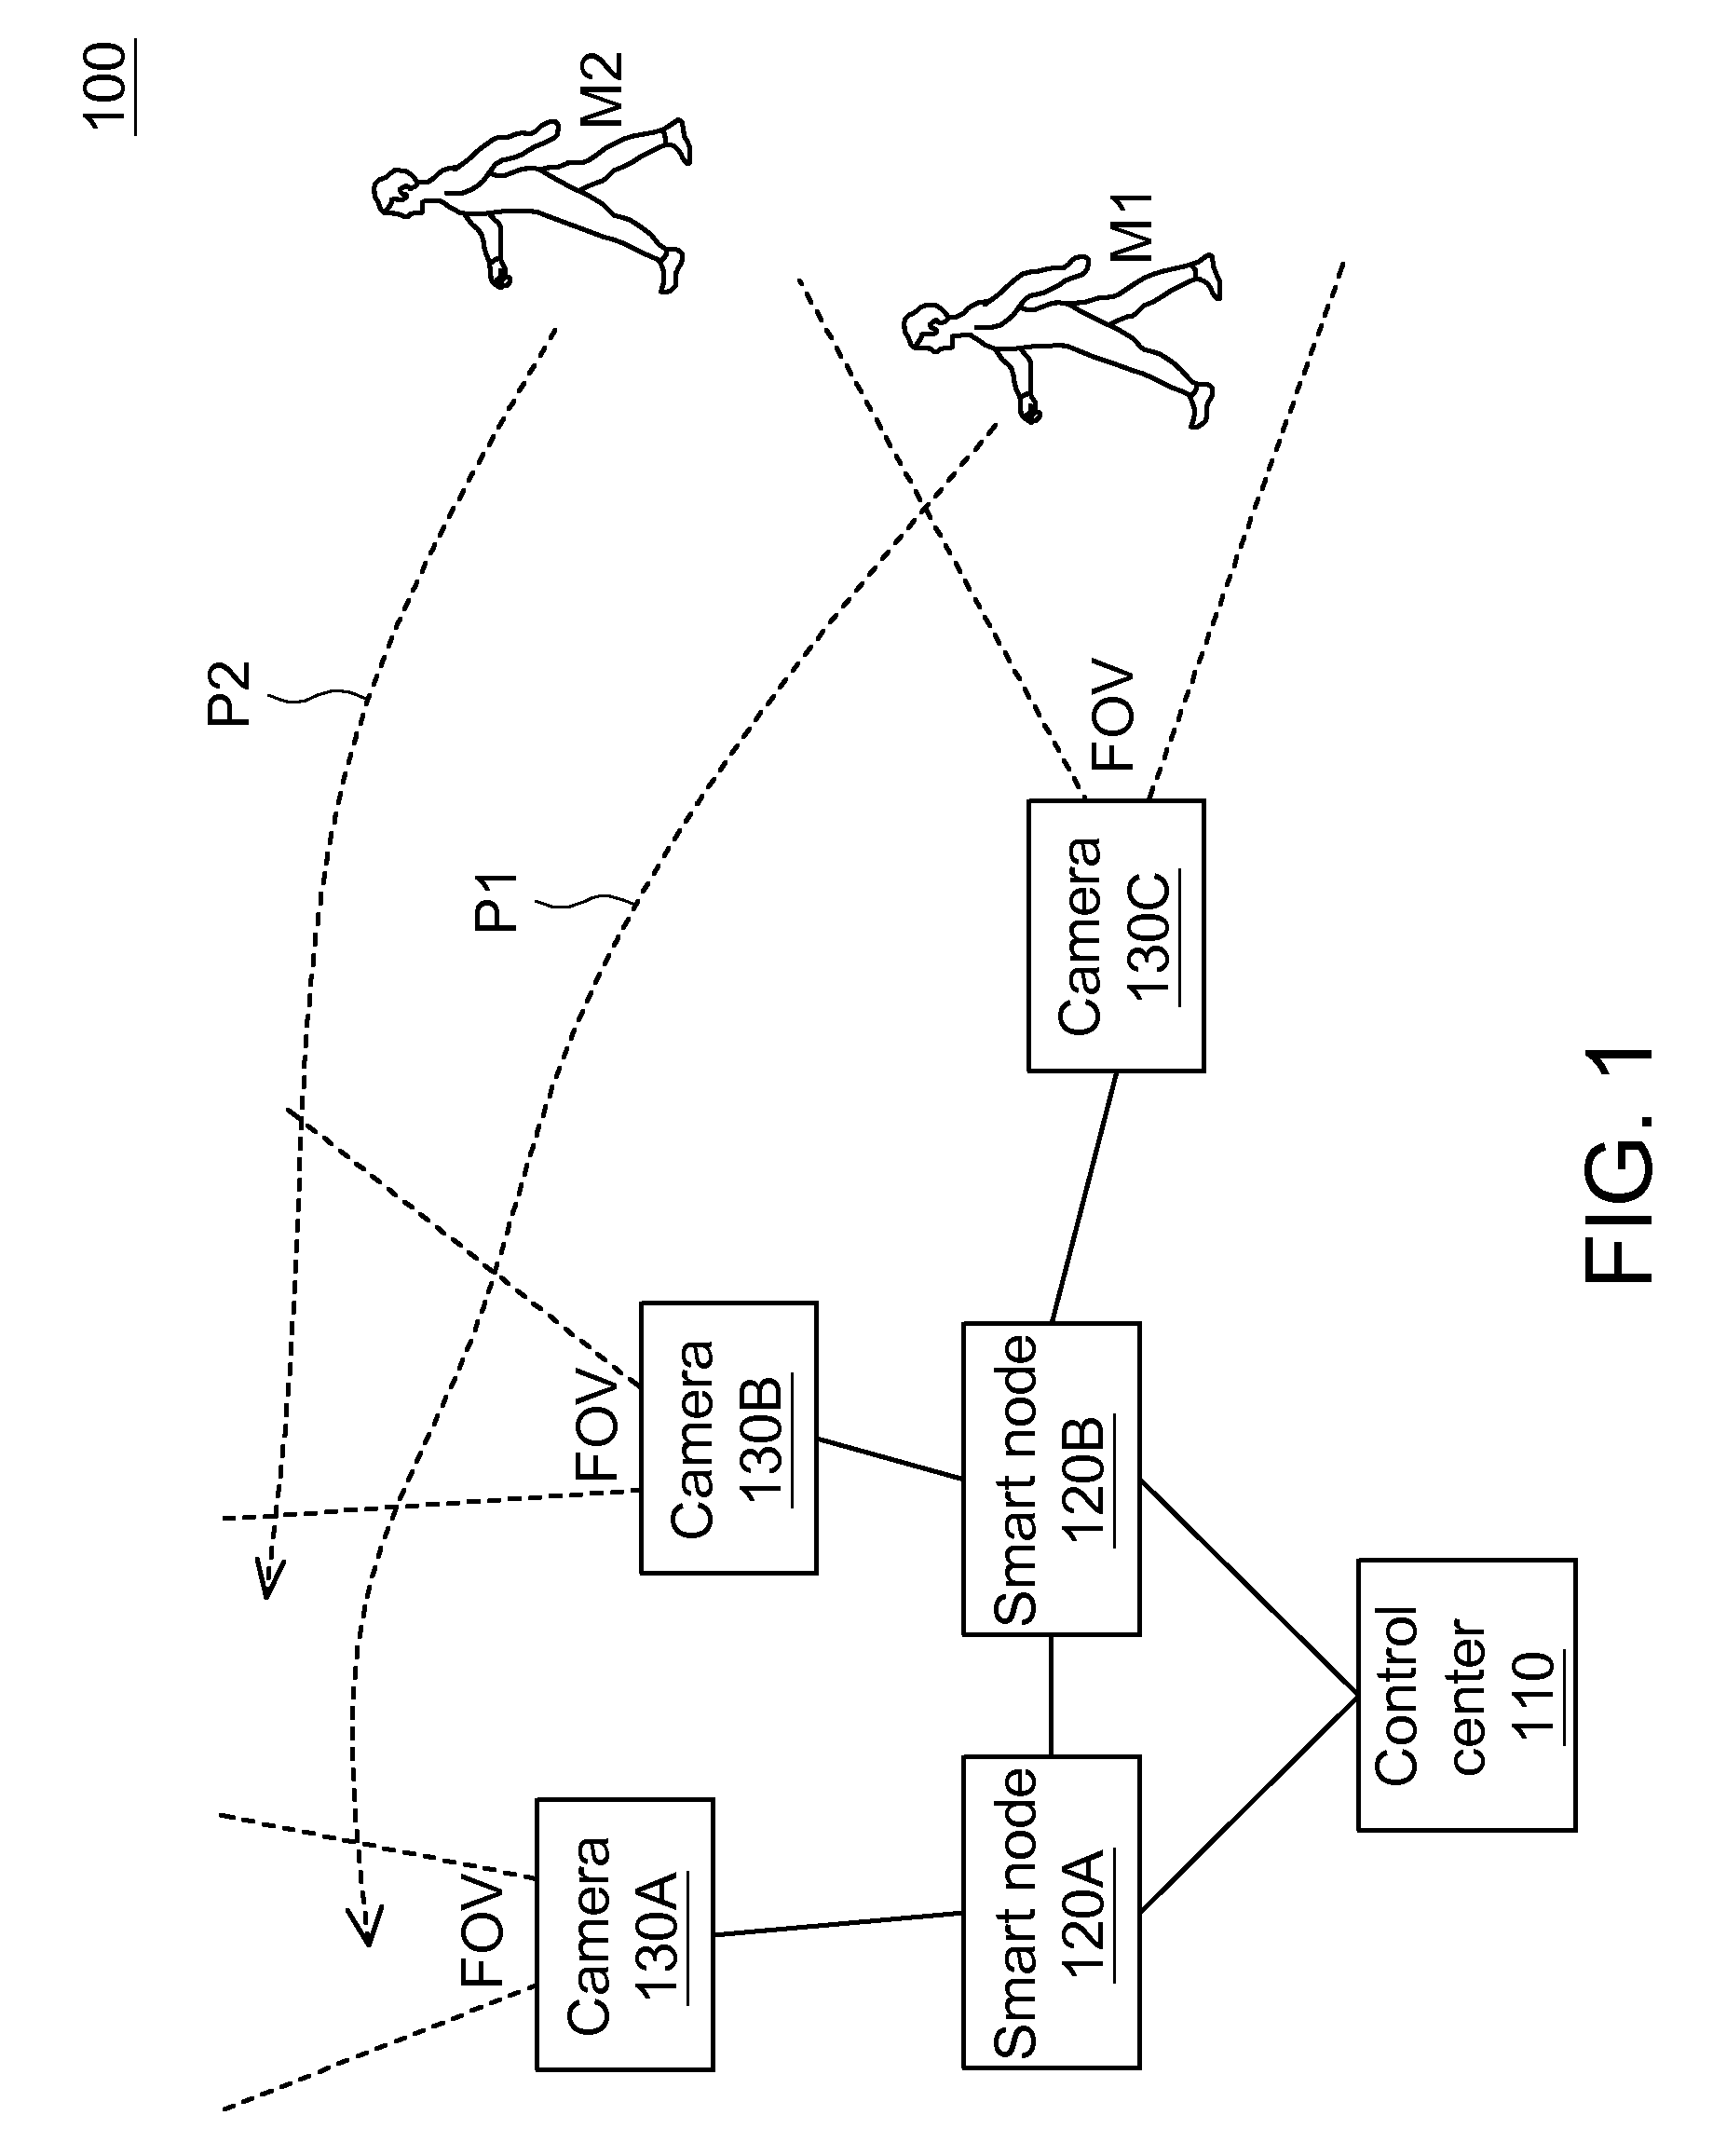 Object tracking system, method and smart node using active camera handoff